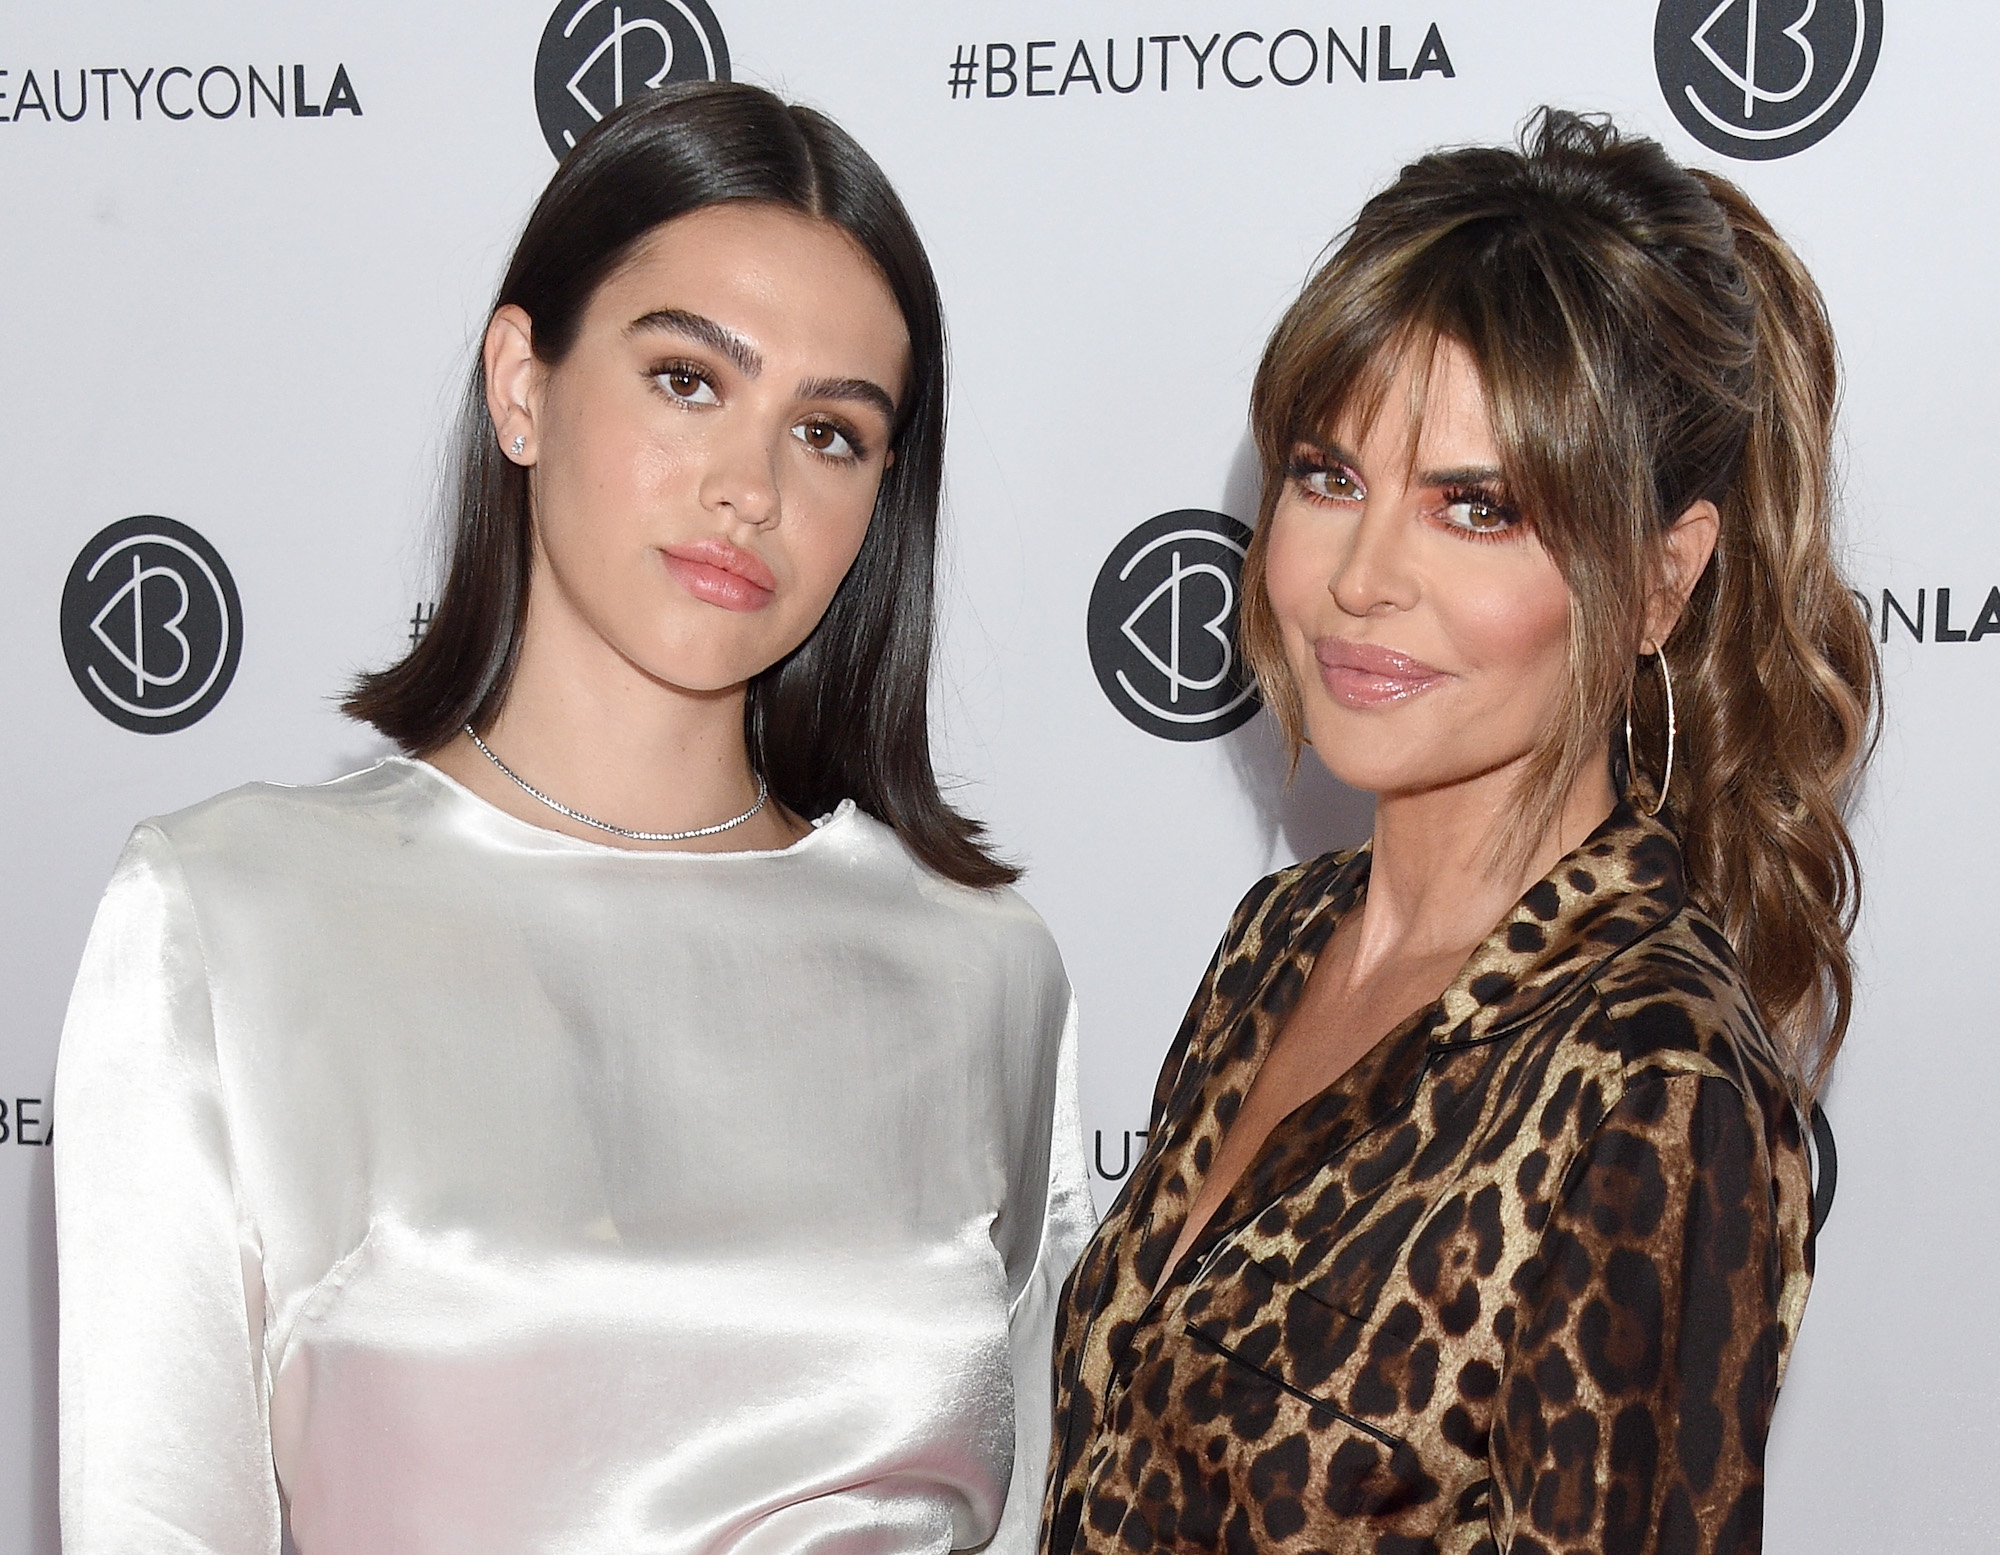 Lisa Rinna and her daughter Amelia attending BeautyCon Los Angeles in 2019